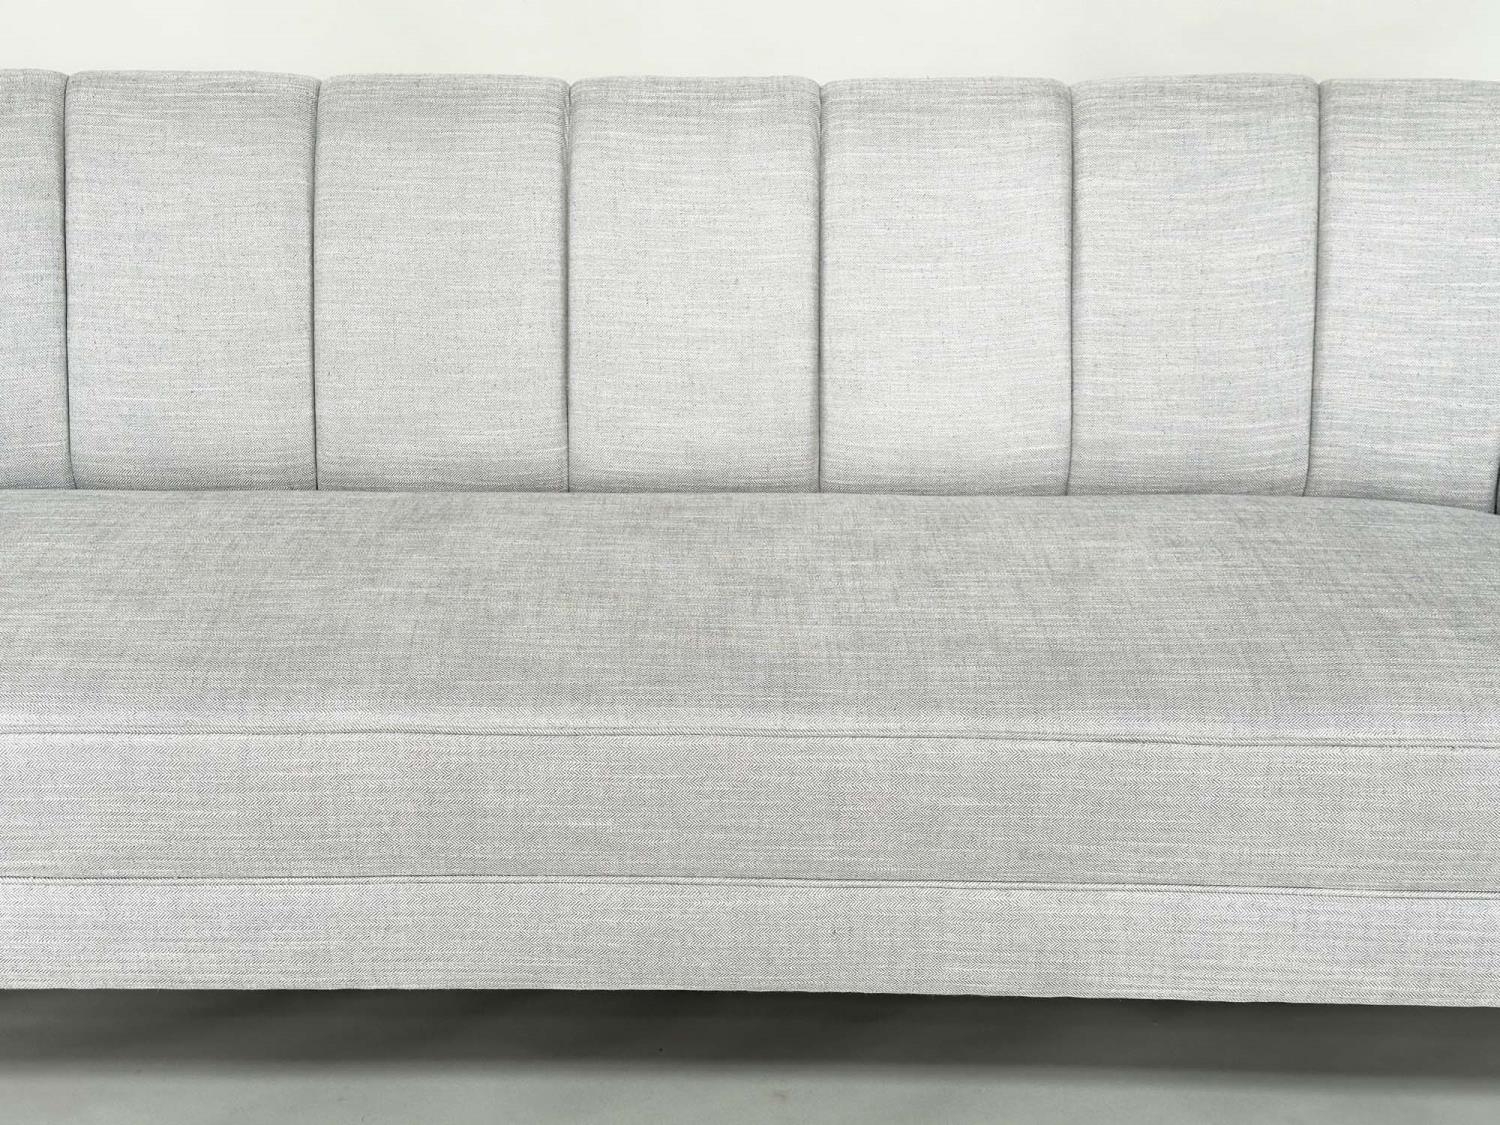 BRAY DESIGN SOFA, ribbed curved back and out swept supports, in Sahco Flint fabric upholstery, 210cm - Image 6 of 11